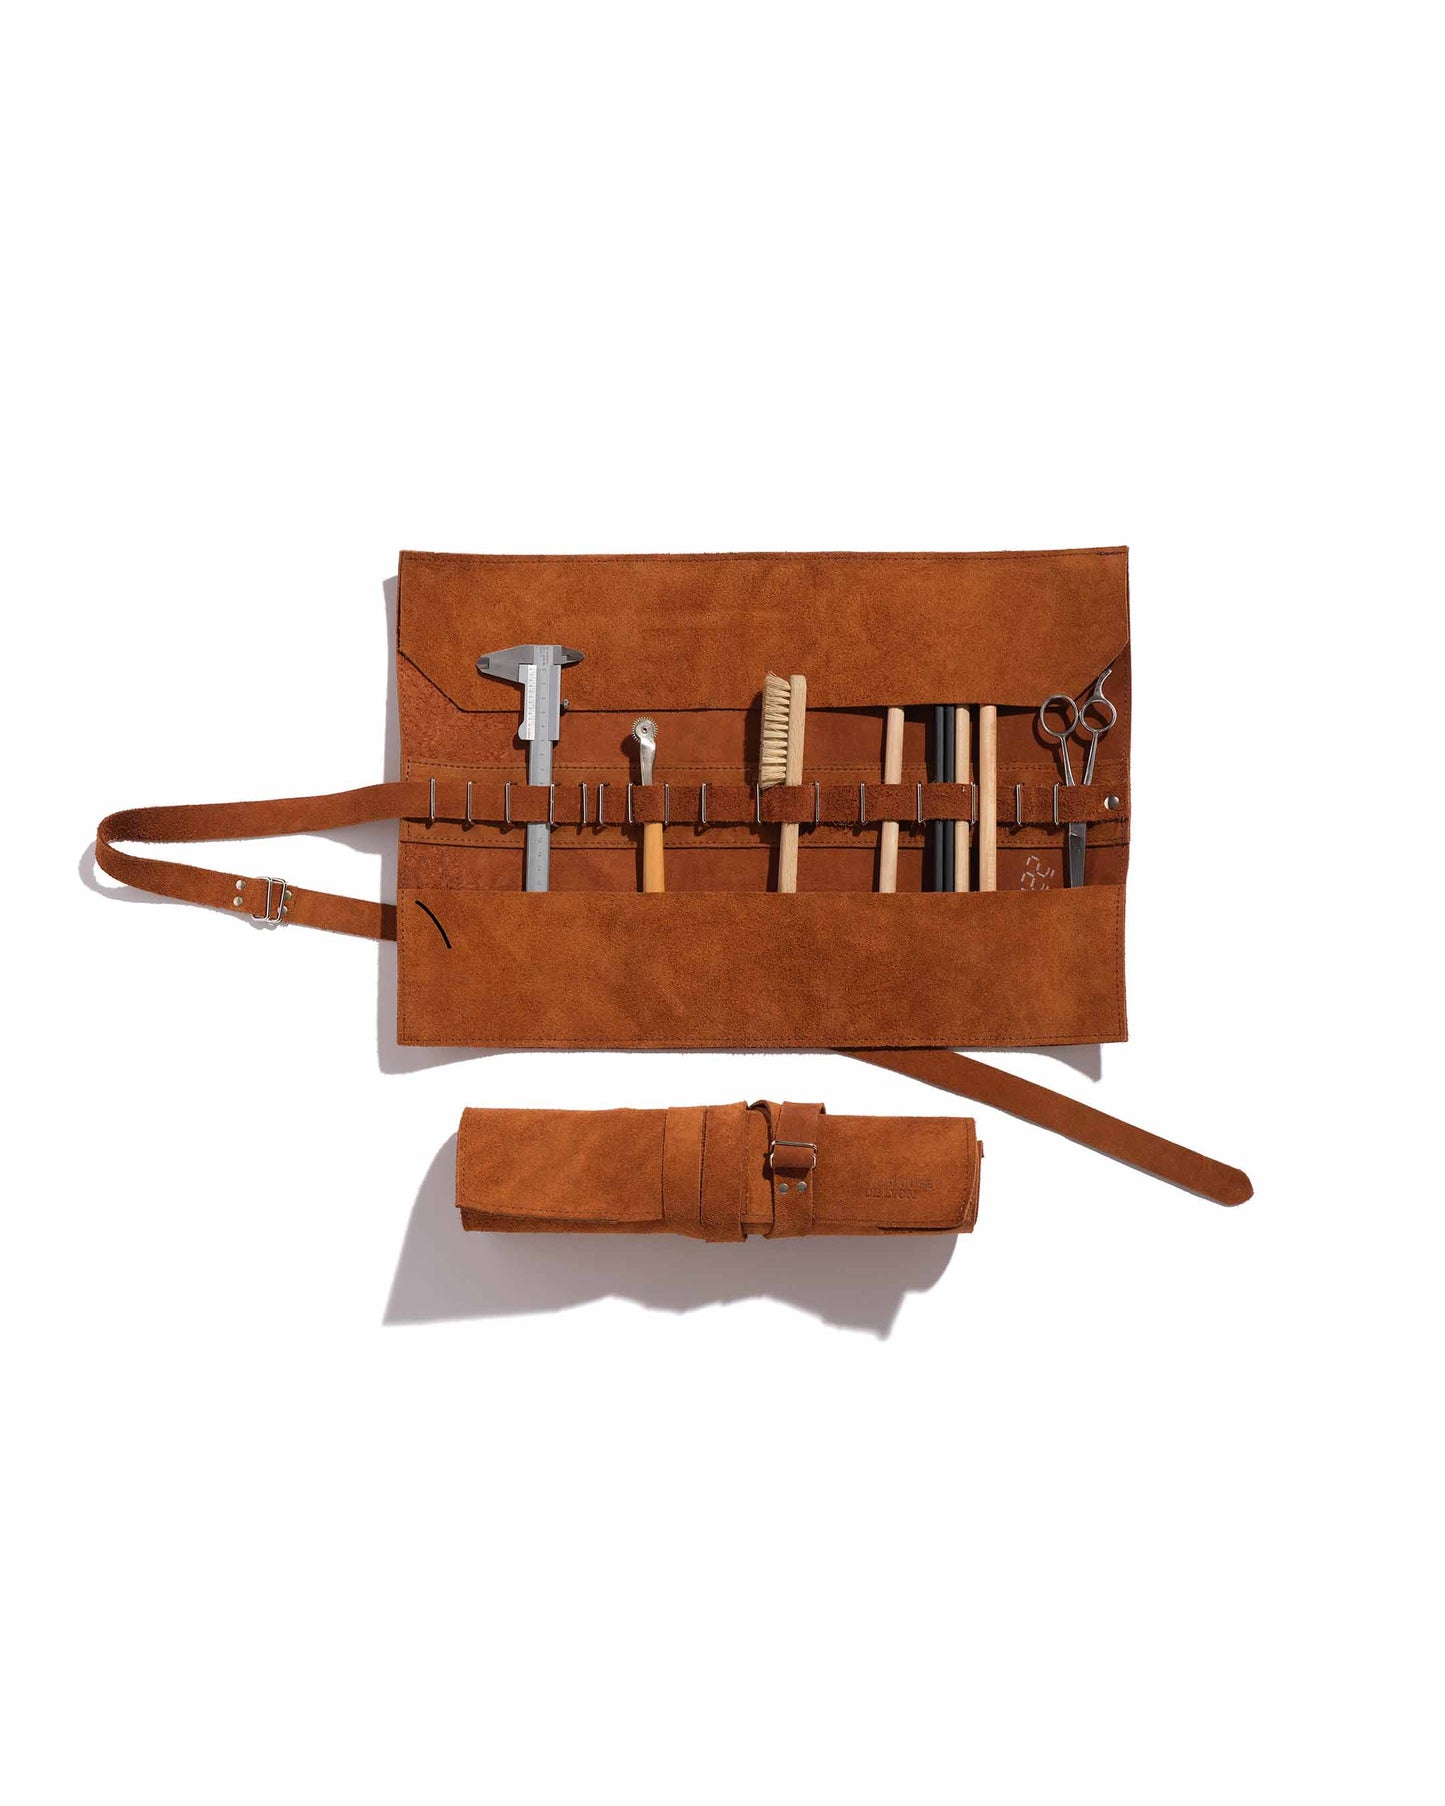 Large leather rolled tool holder